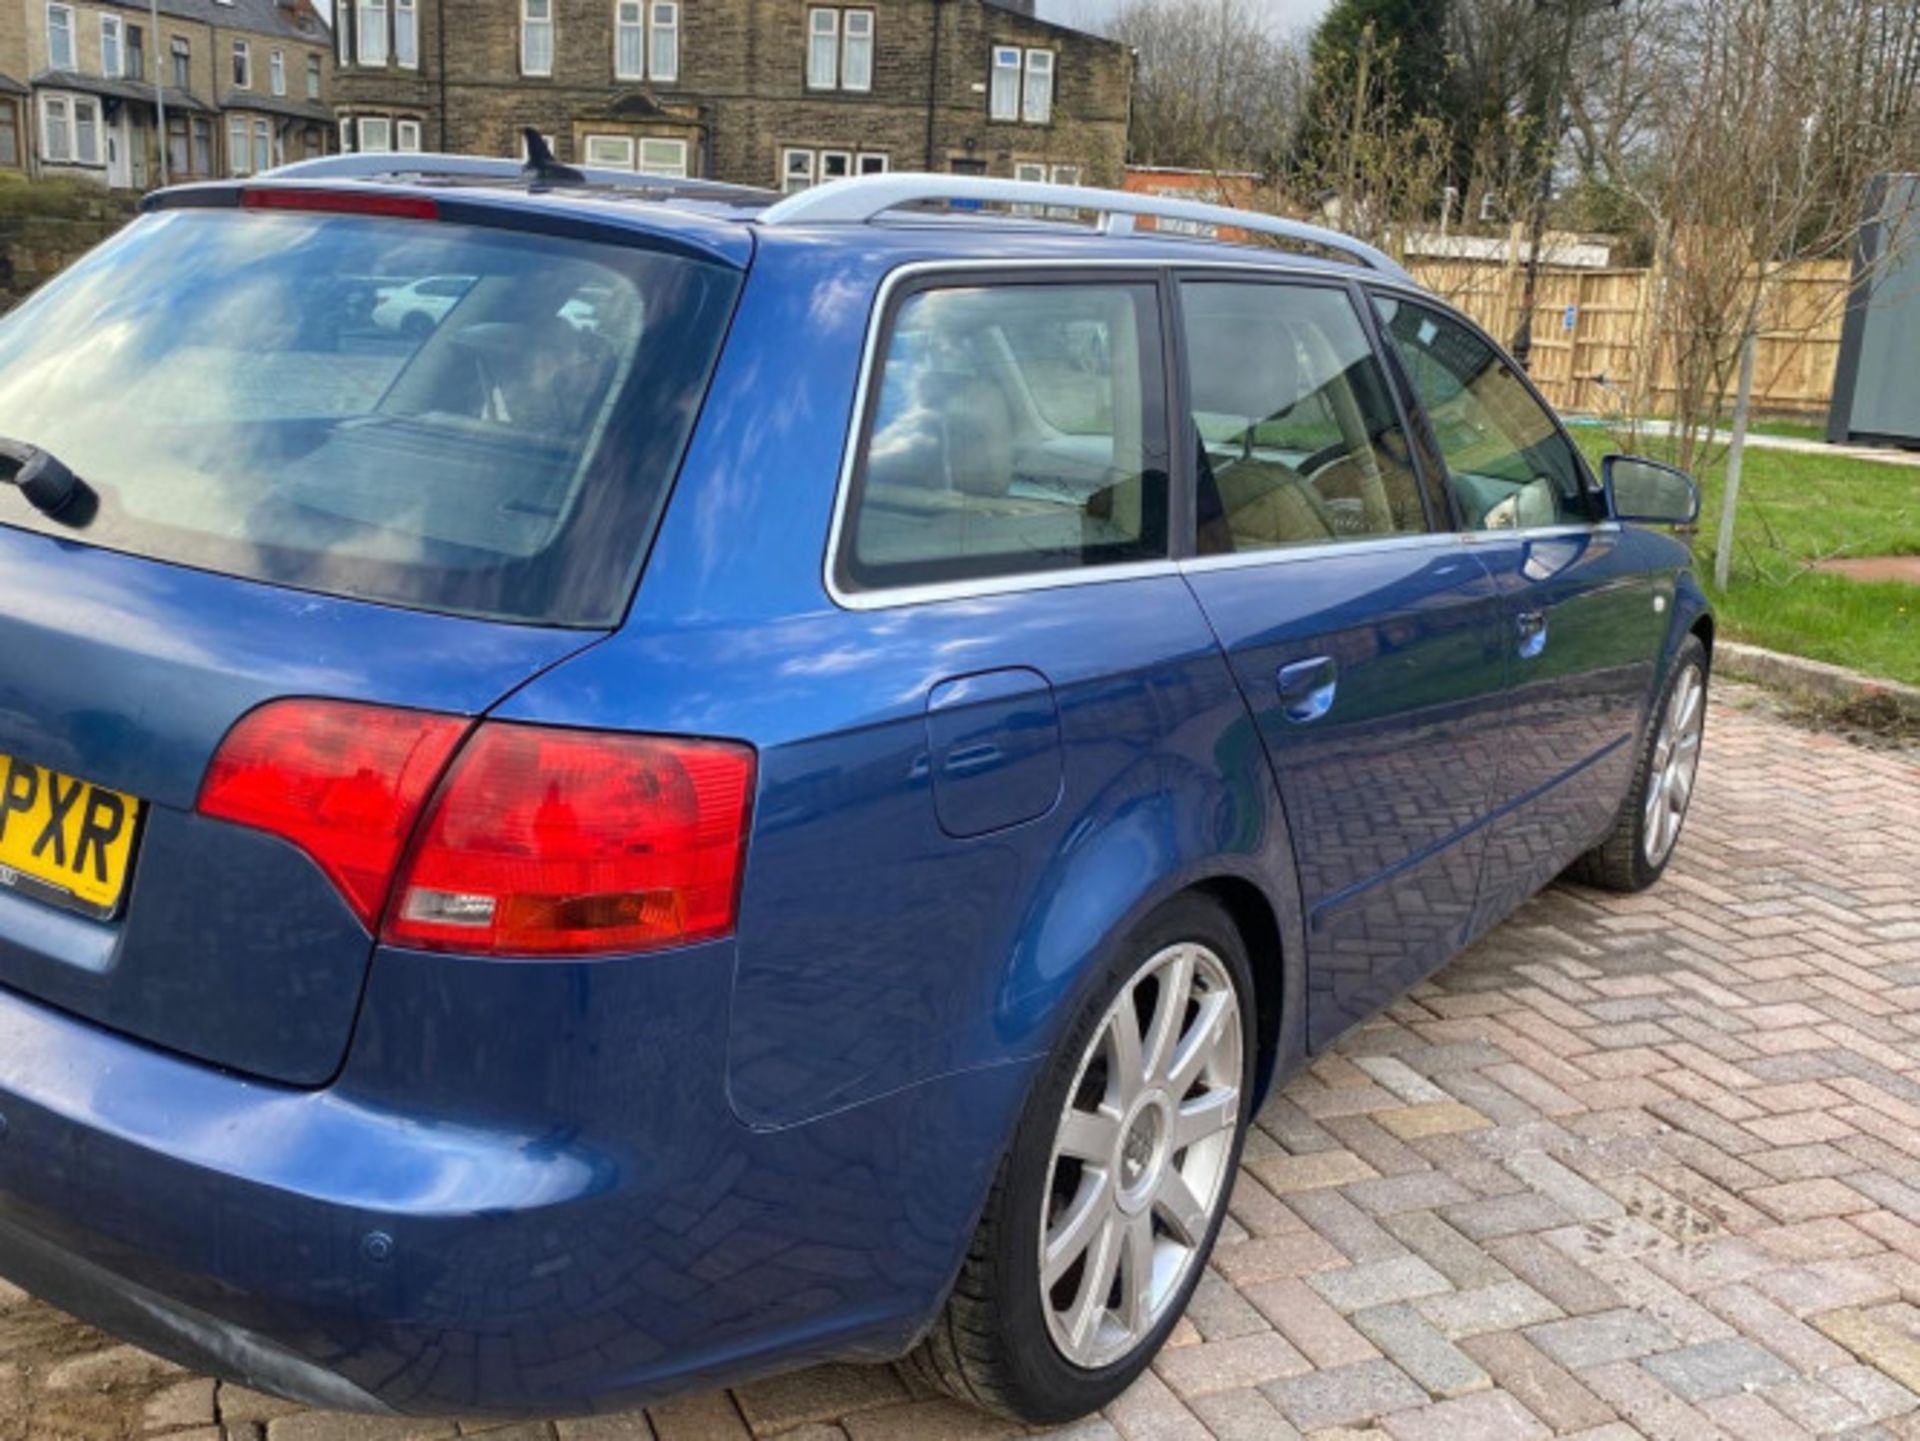 AUDI A4 AVANT 1.9 TDI SE 5DR ESTATE - RARE AND RELIABLE LUXURY WAGON >>--NO VAT ON HAMMER--<< - Image 58 of 63